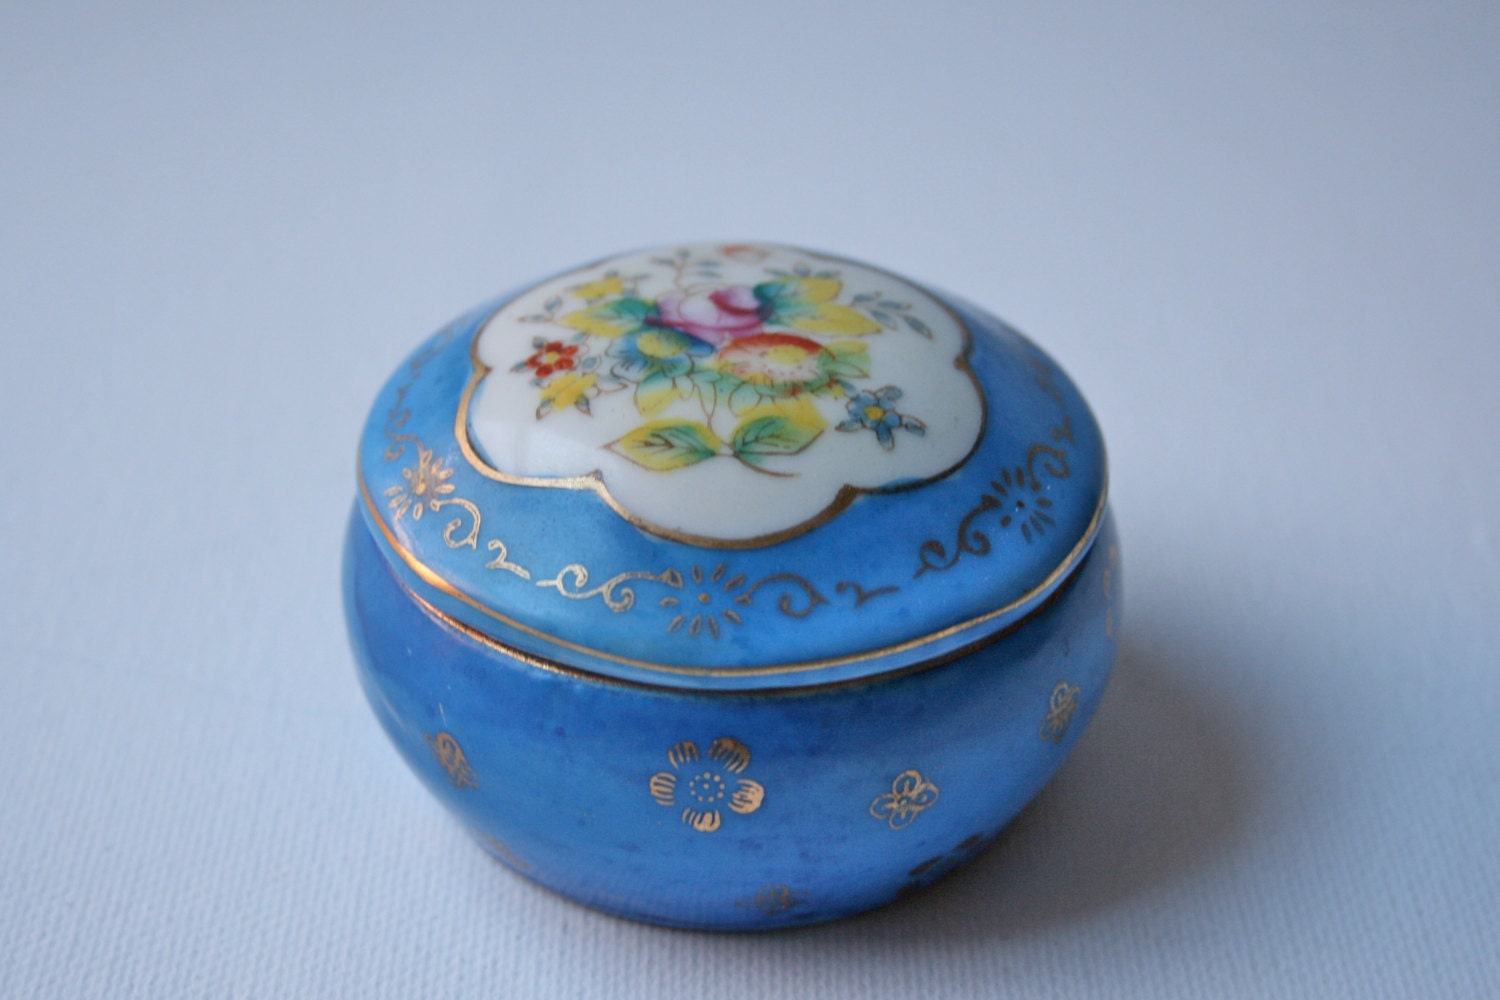 Trinket box Made in Occupied Japan